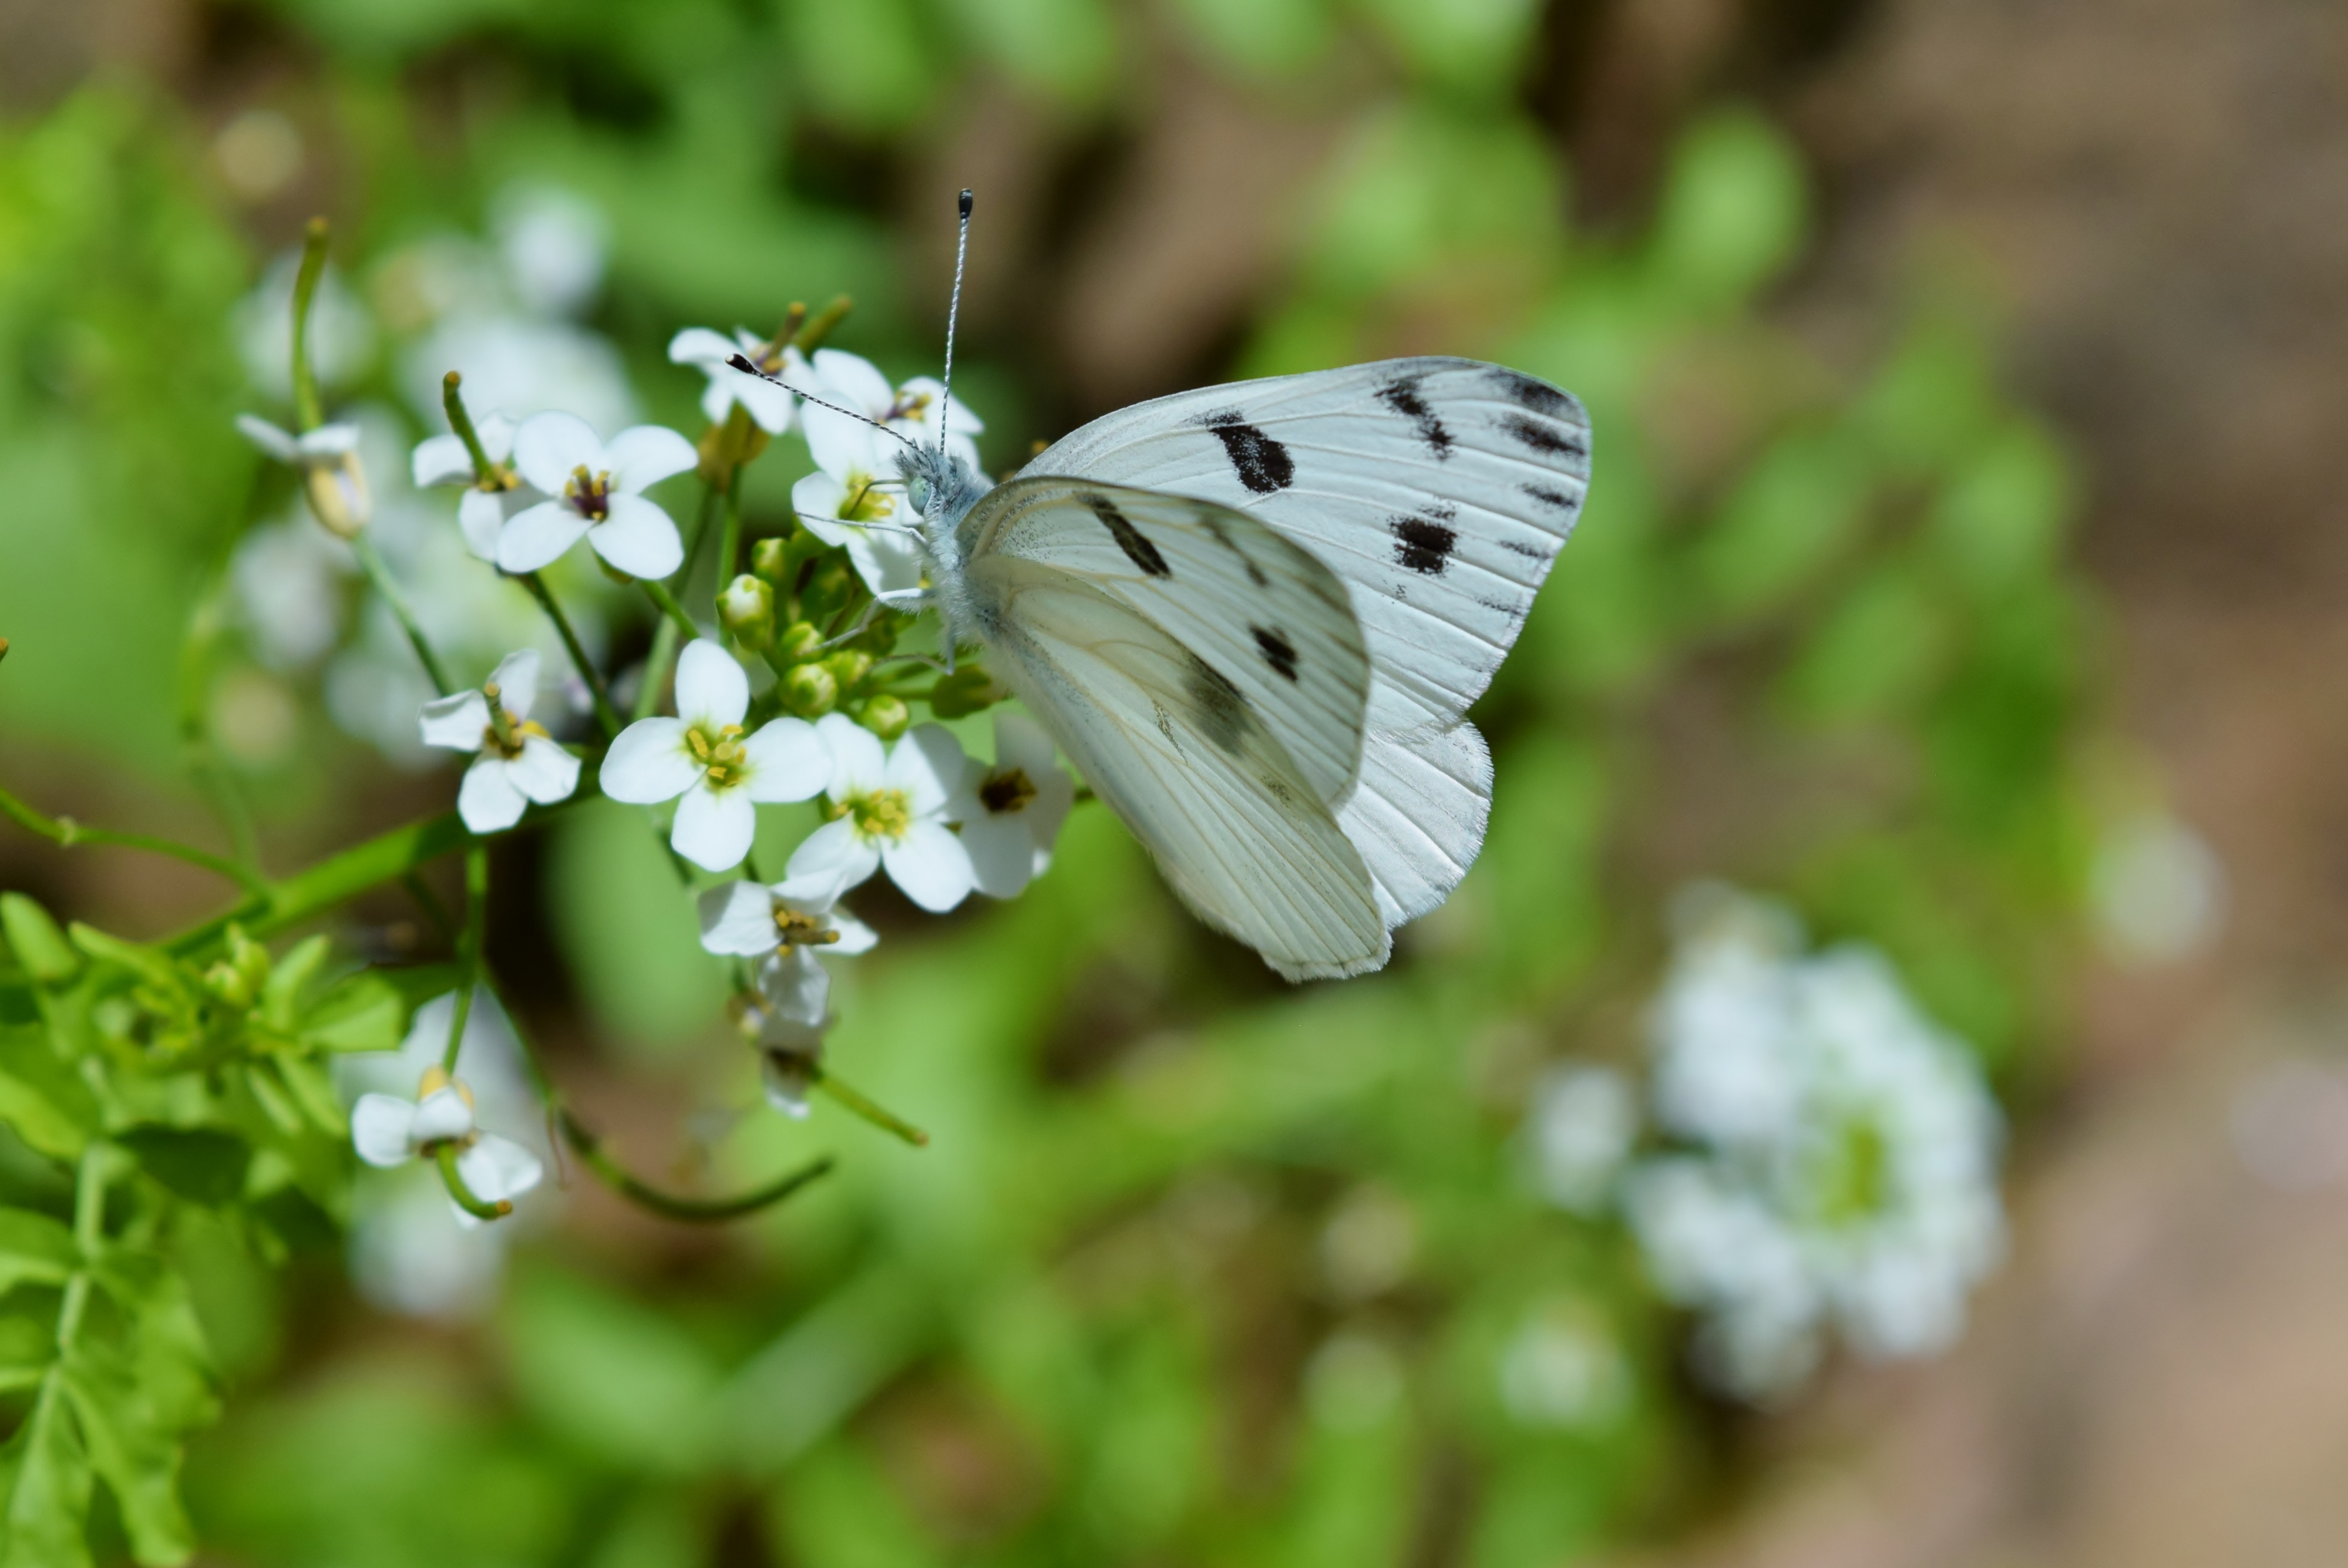 CabbageWhite Butterfly(Pieris rapae)